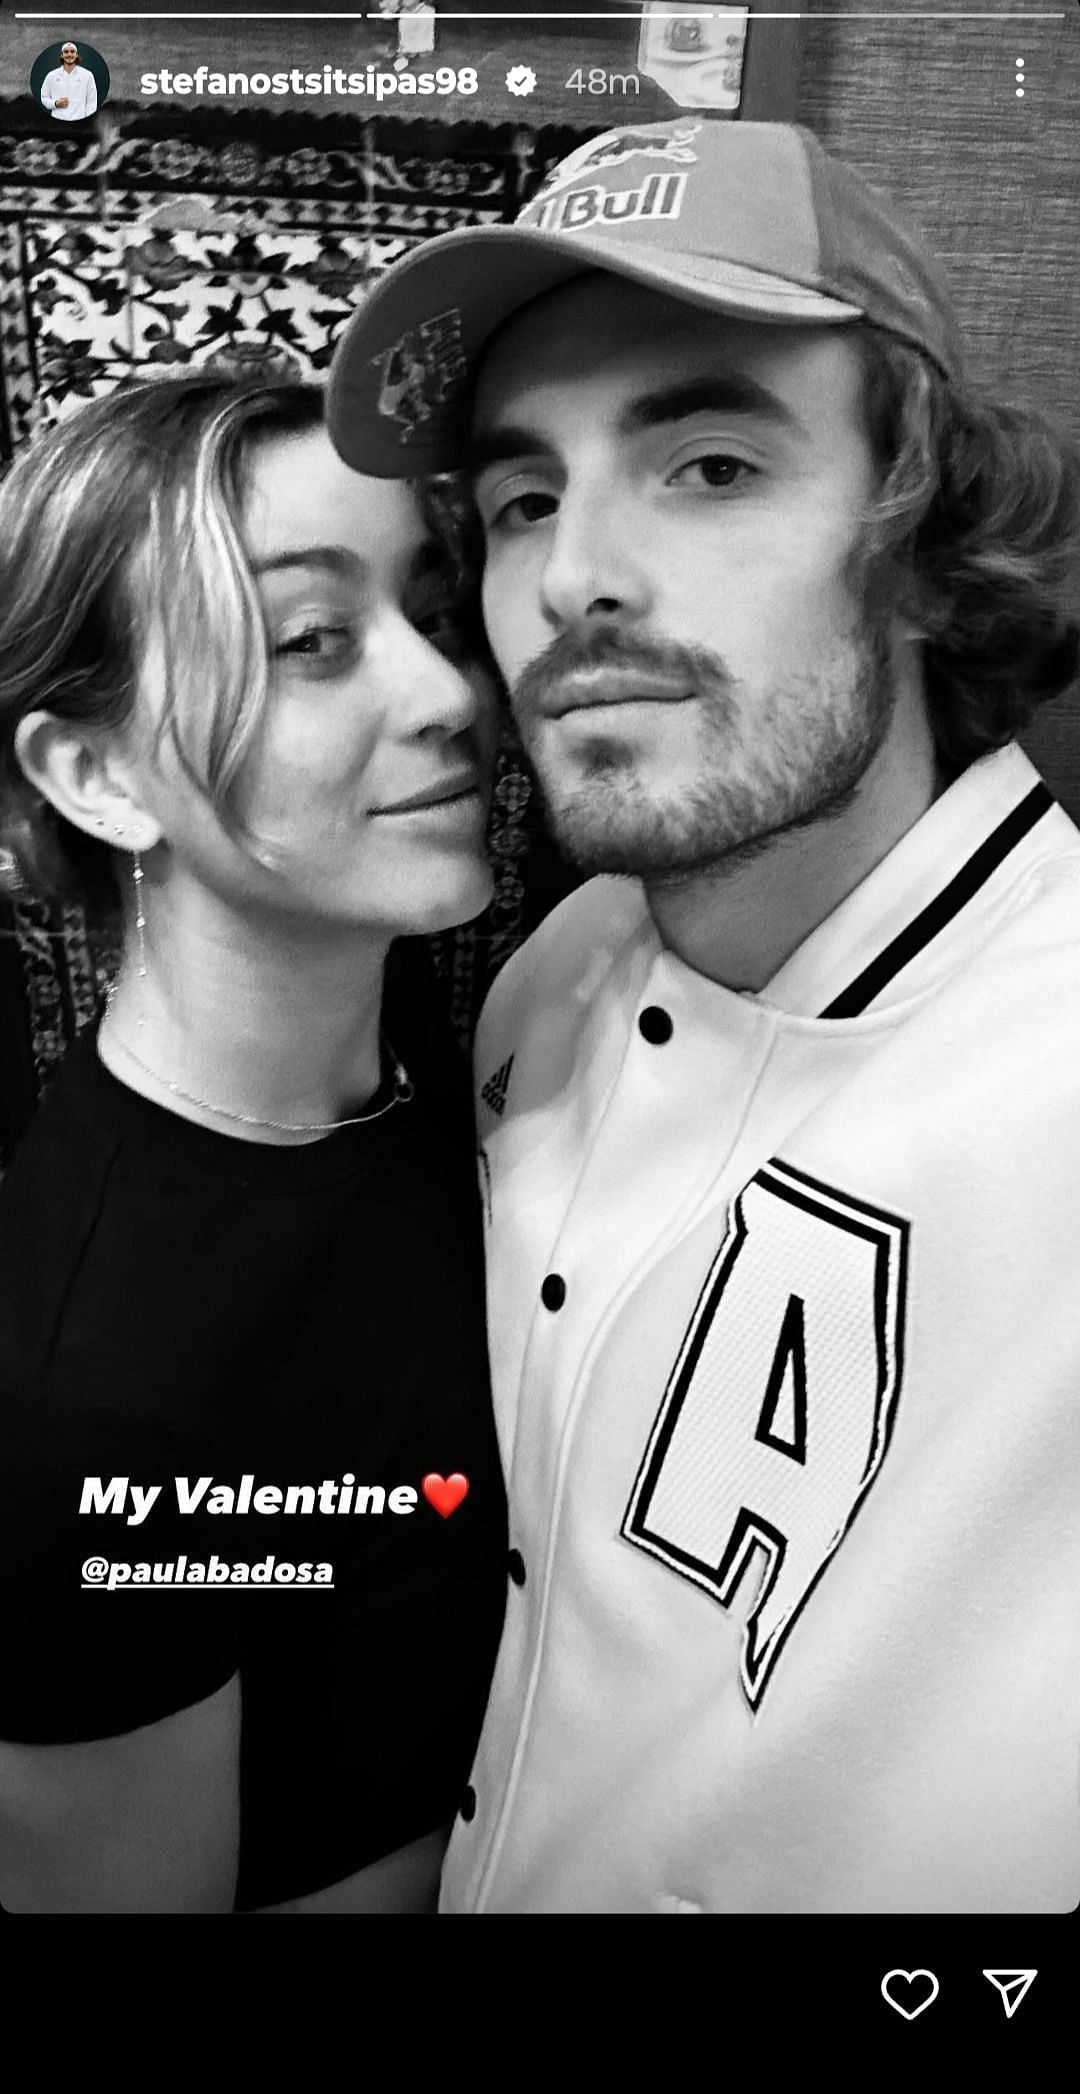 Stefanos Tsitsipas shares a cute picture with his girlfriend